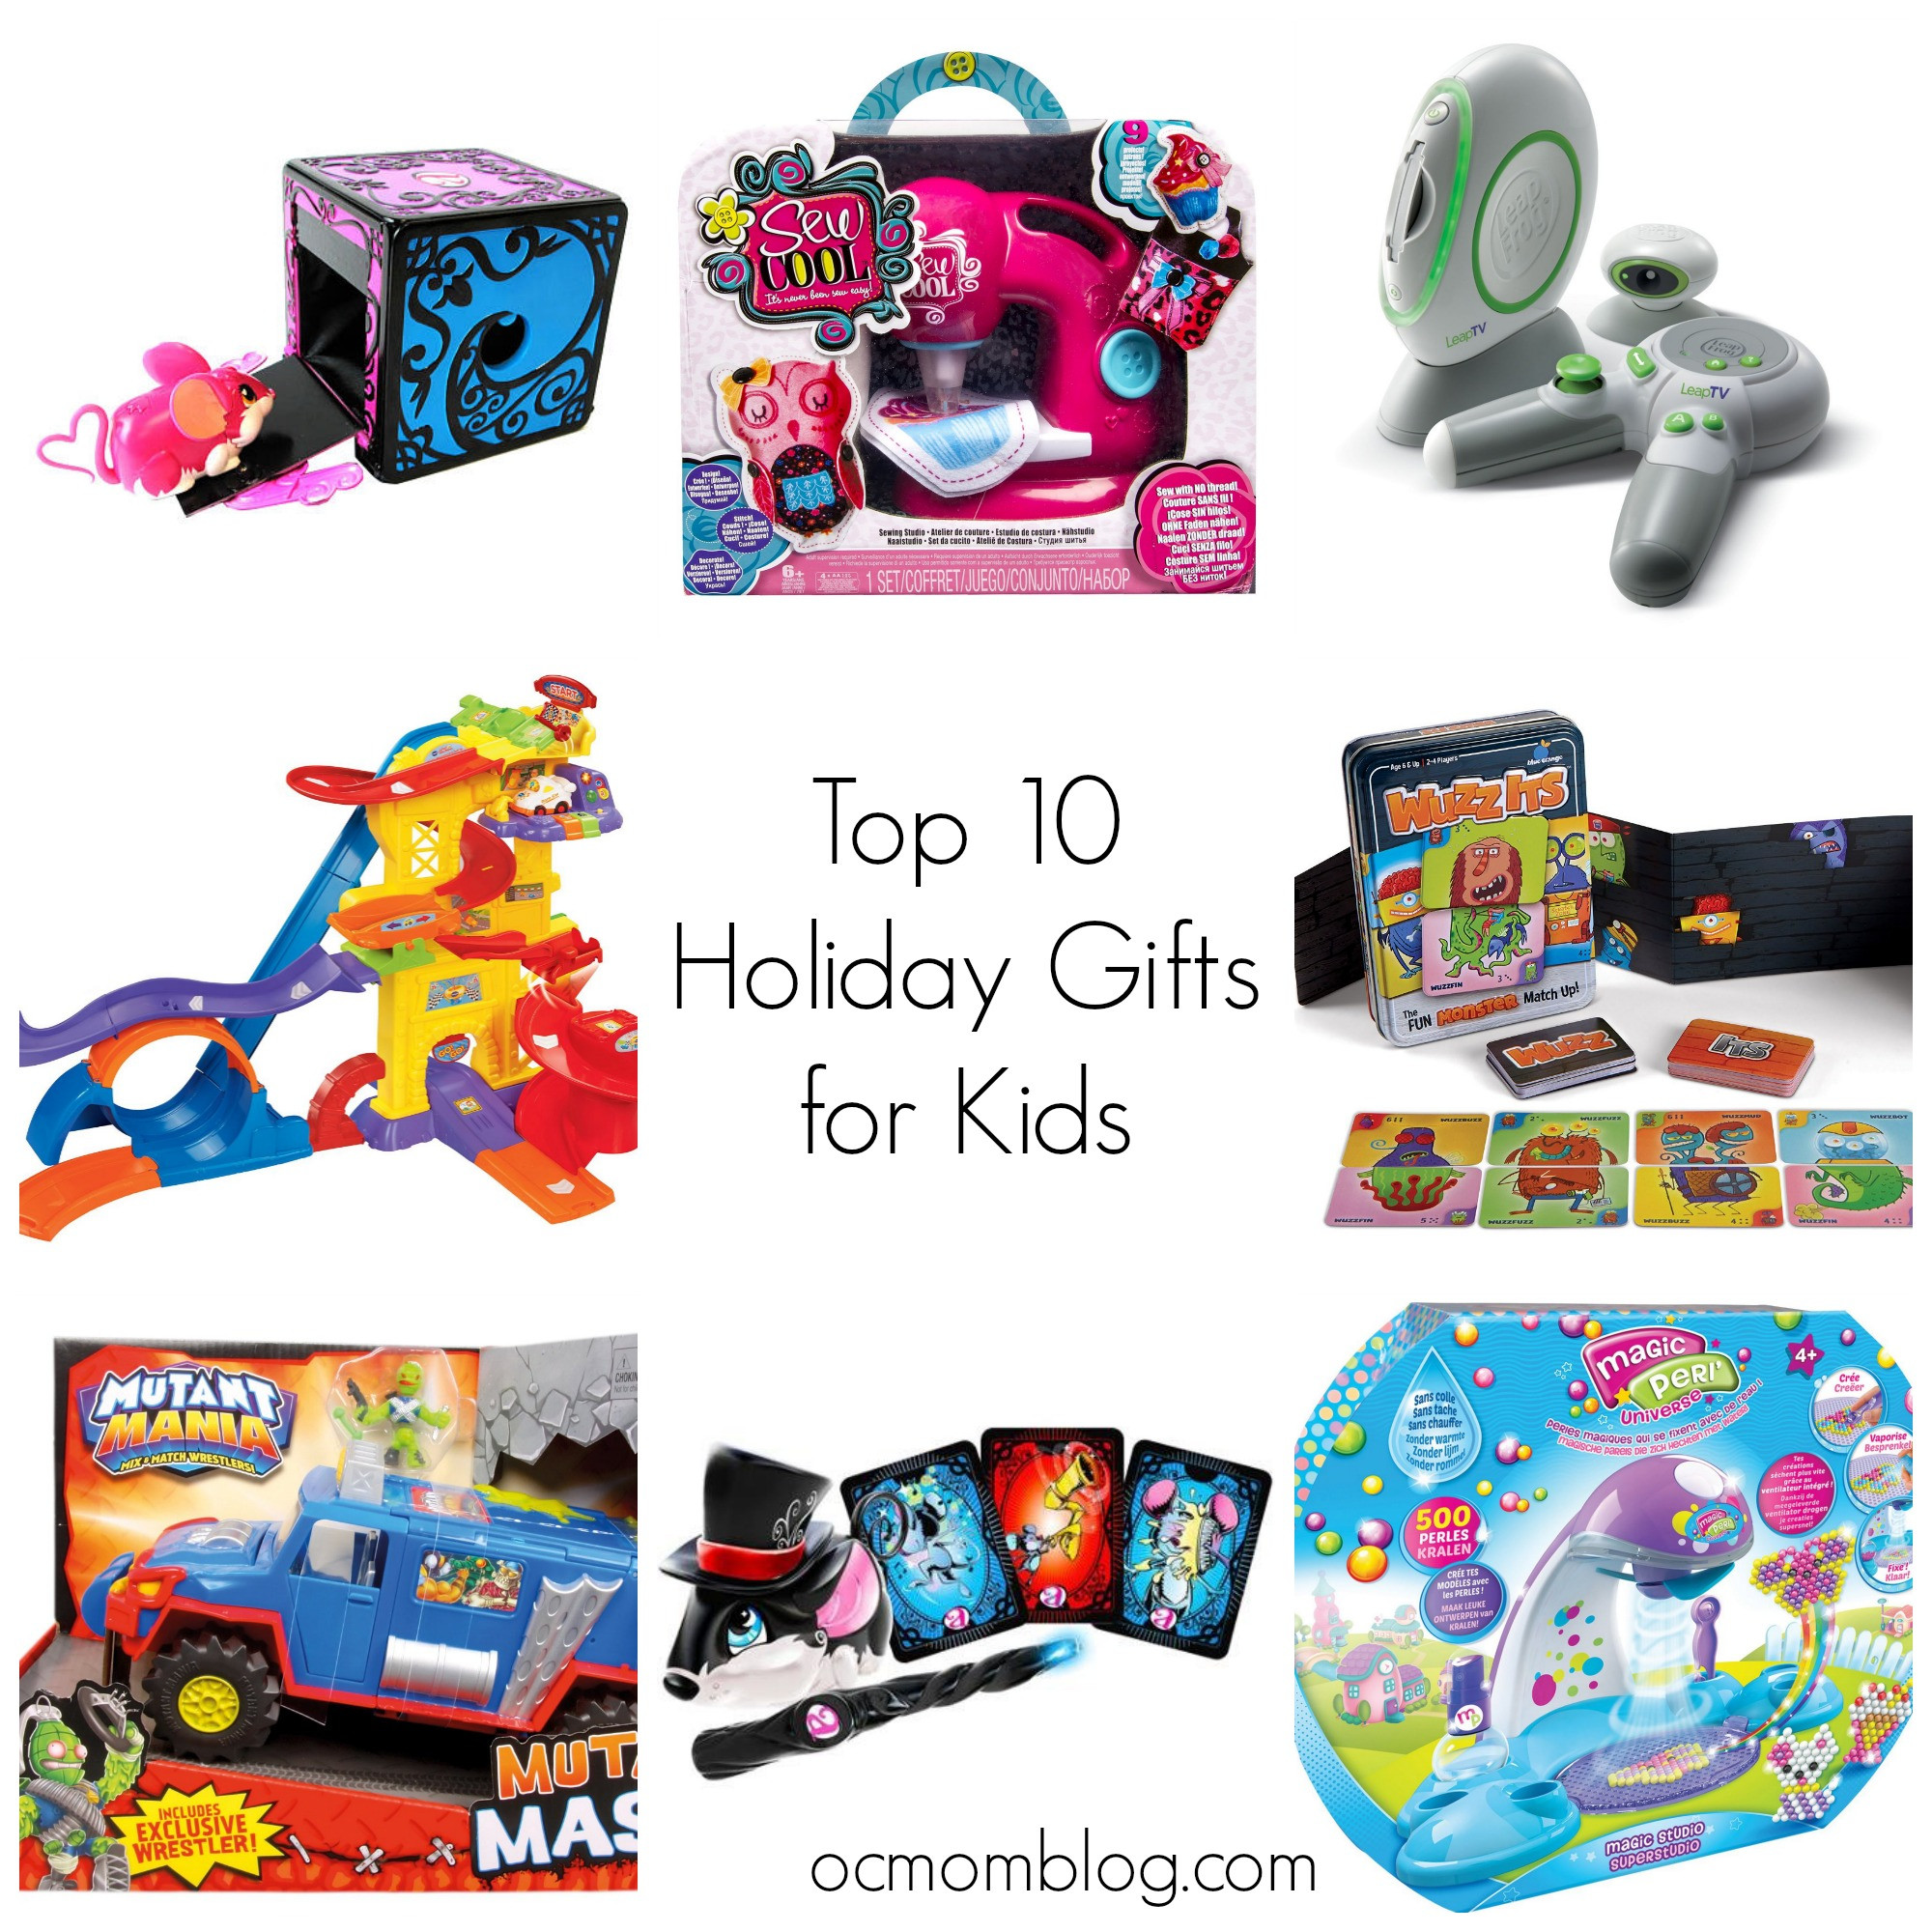 Popular Gifts For Children
 Holiday Gift Guide Top 10 Gifts for Kids